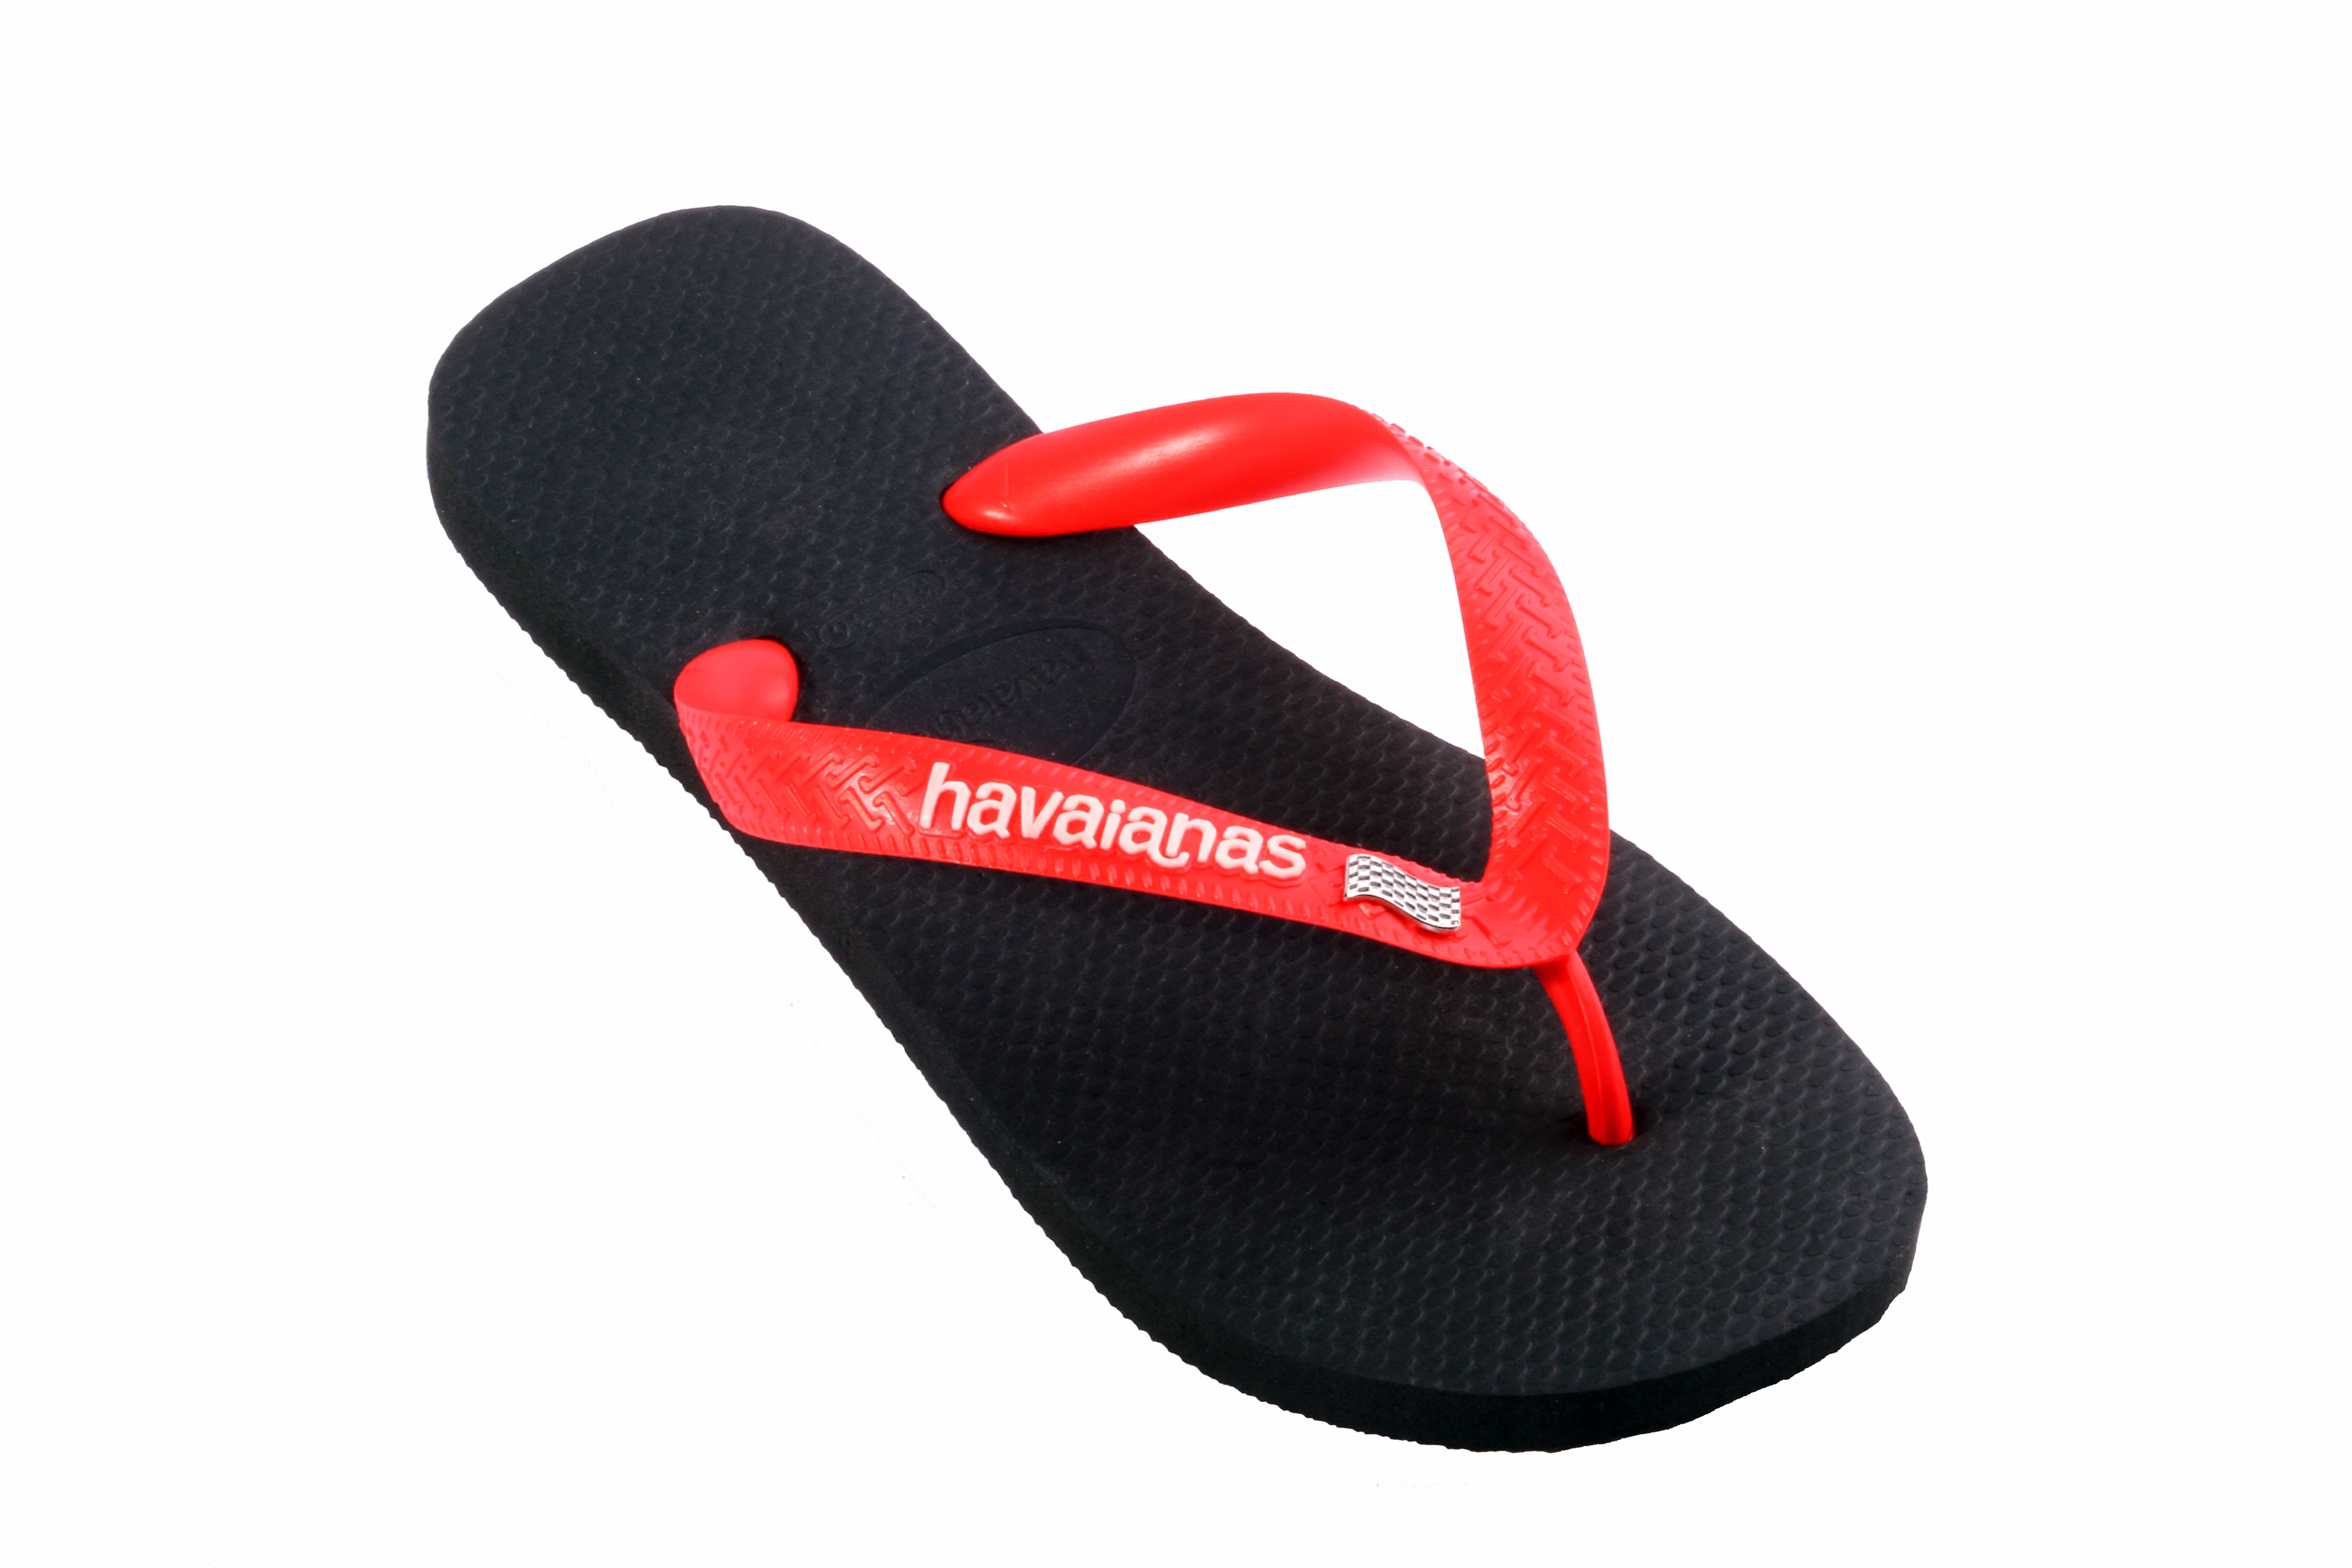 Havaianas Limited Edition Auto-Racing inspired Design